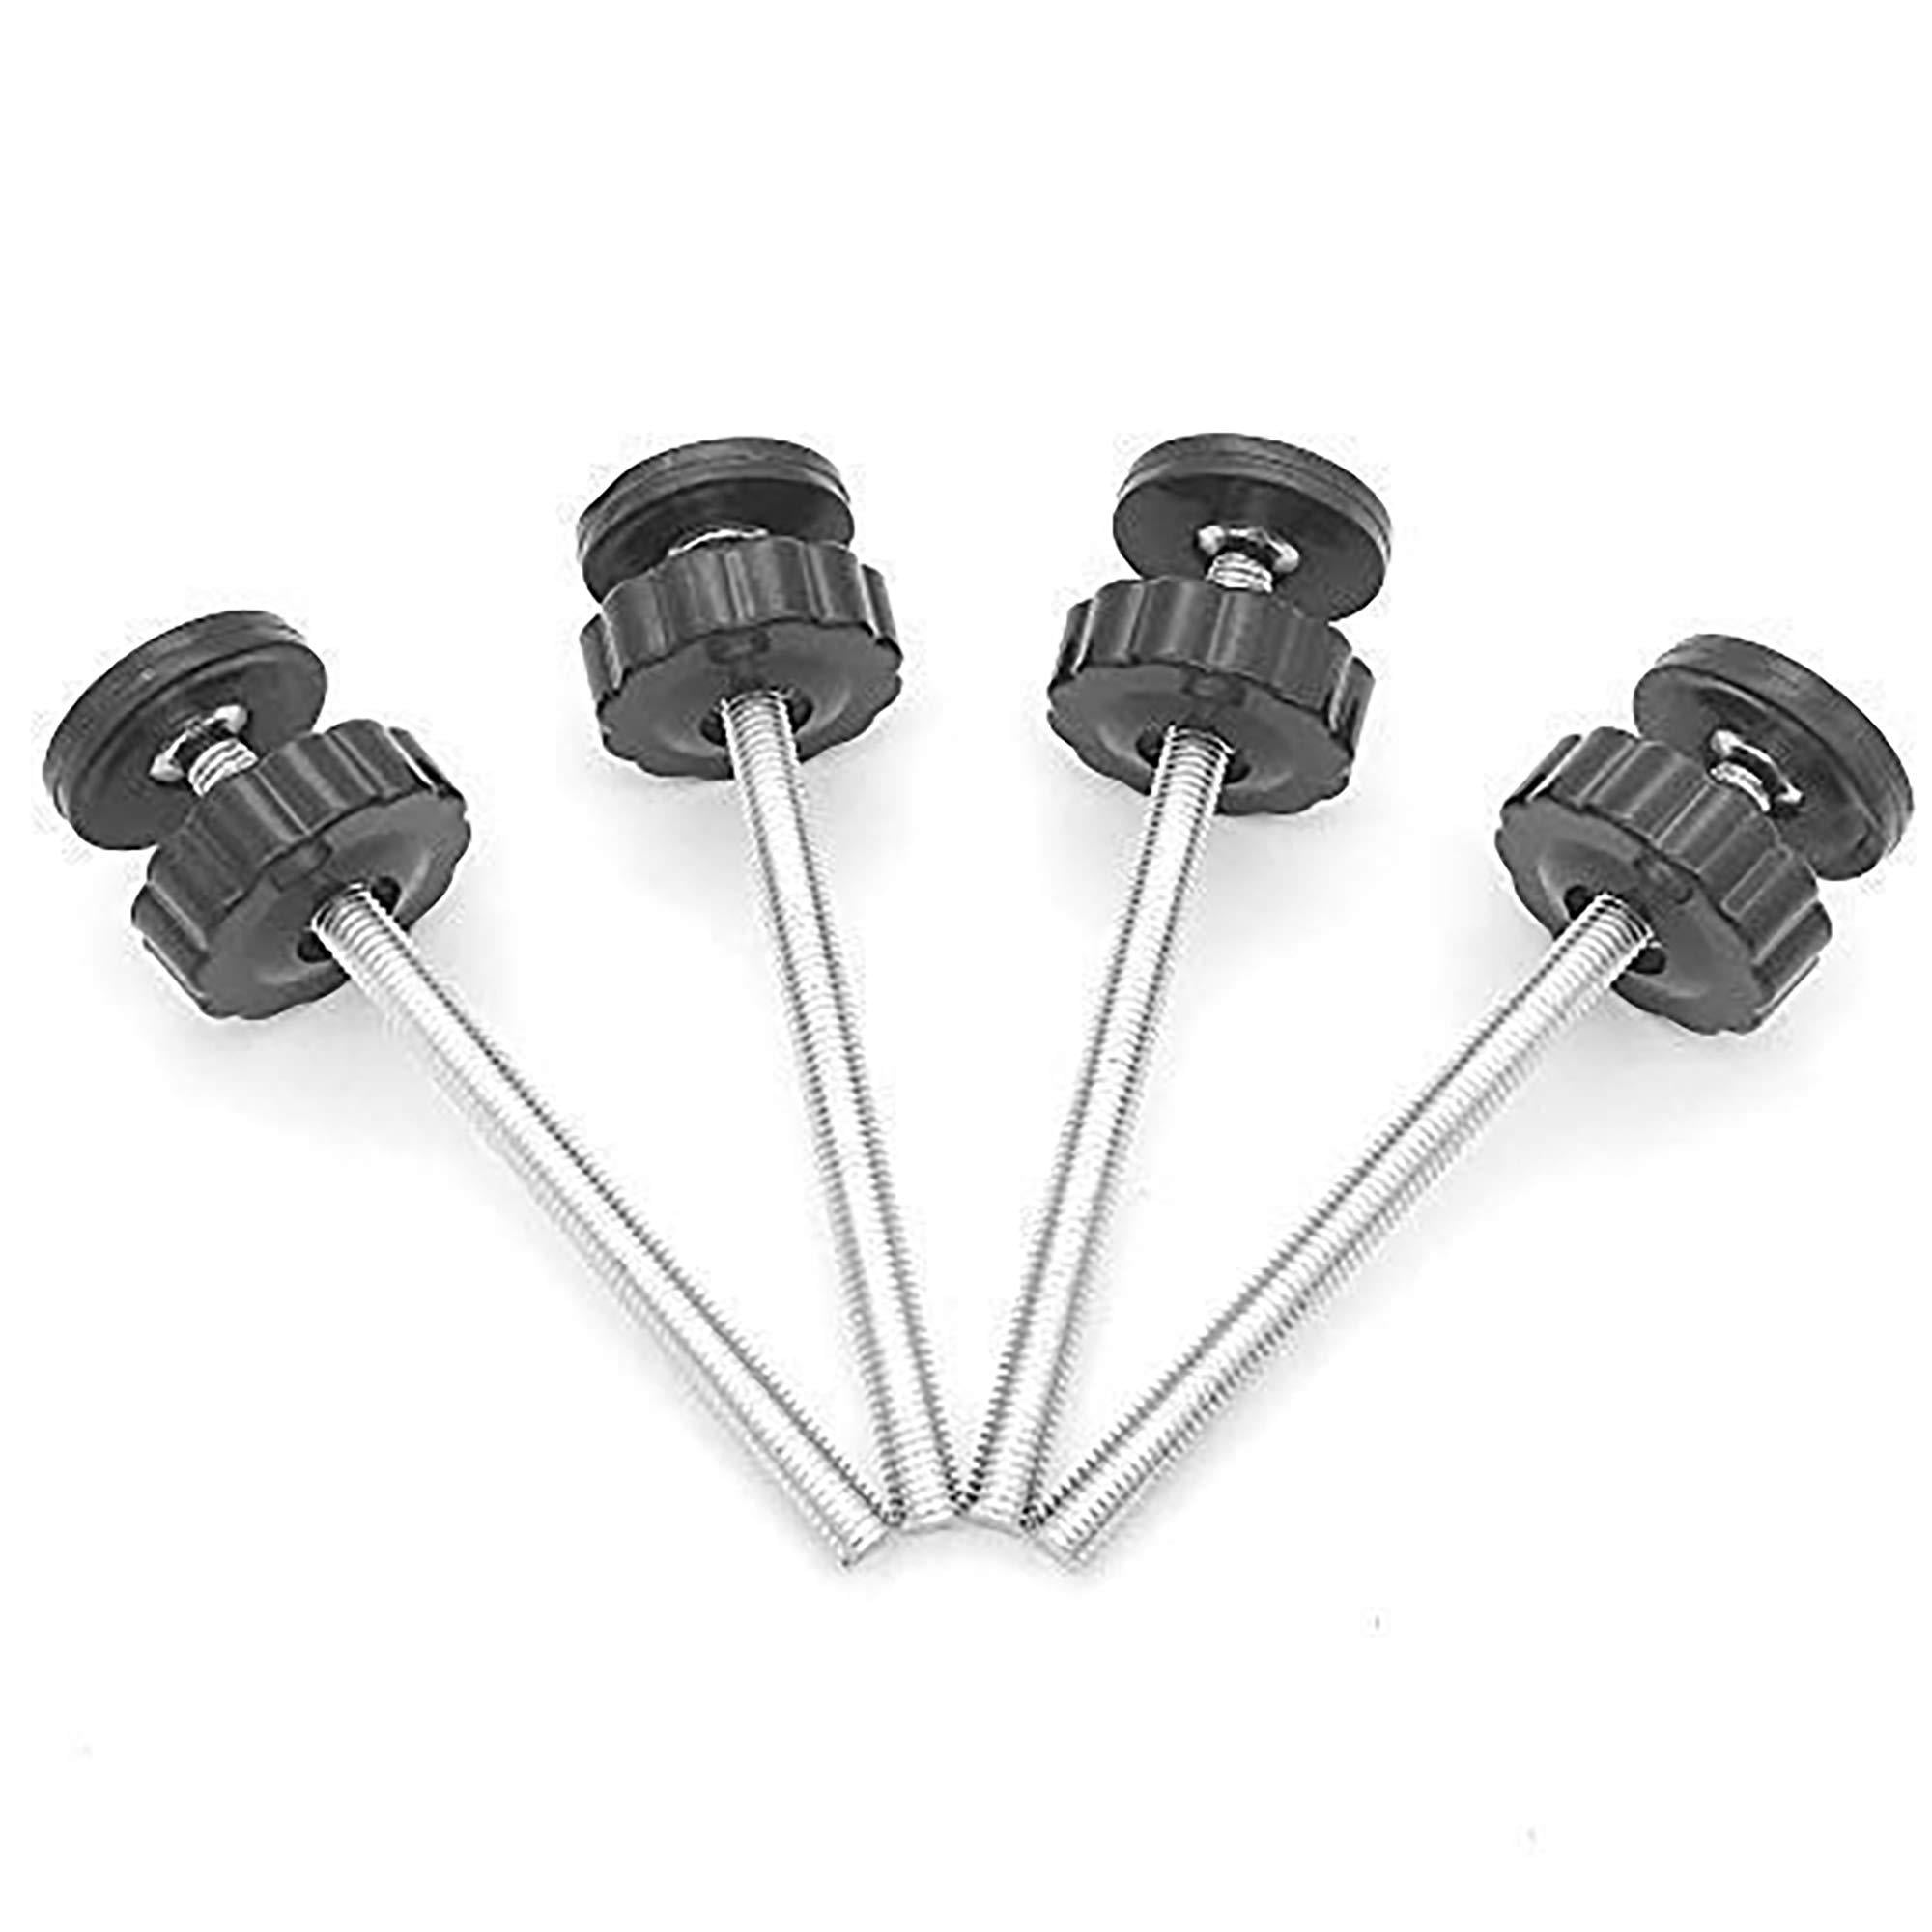 Pressure Mounted Baby Gates Threaded Spindle Rods for Stair Gates Dog Gate J 